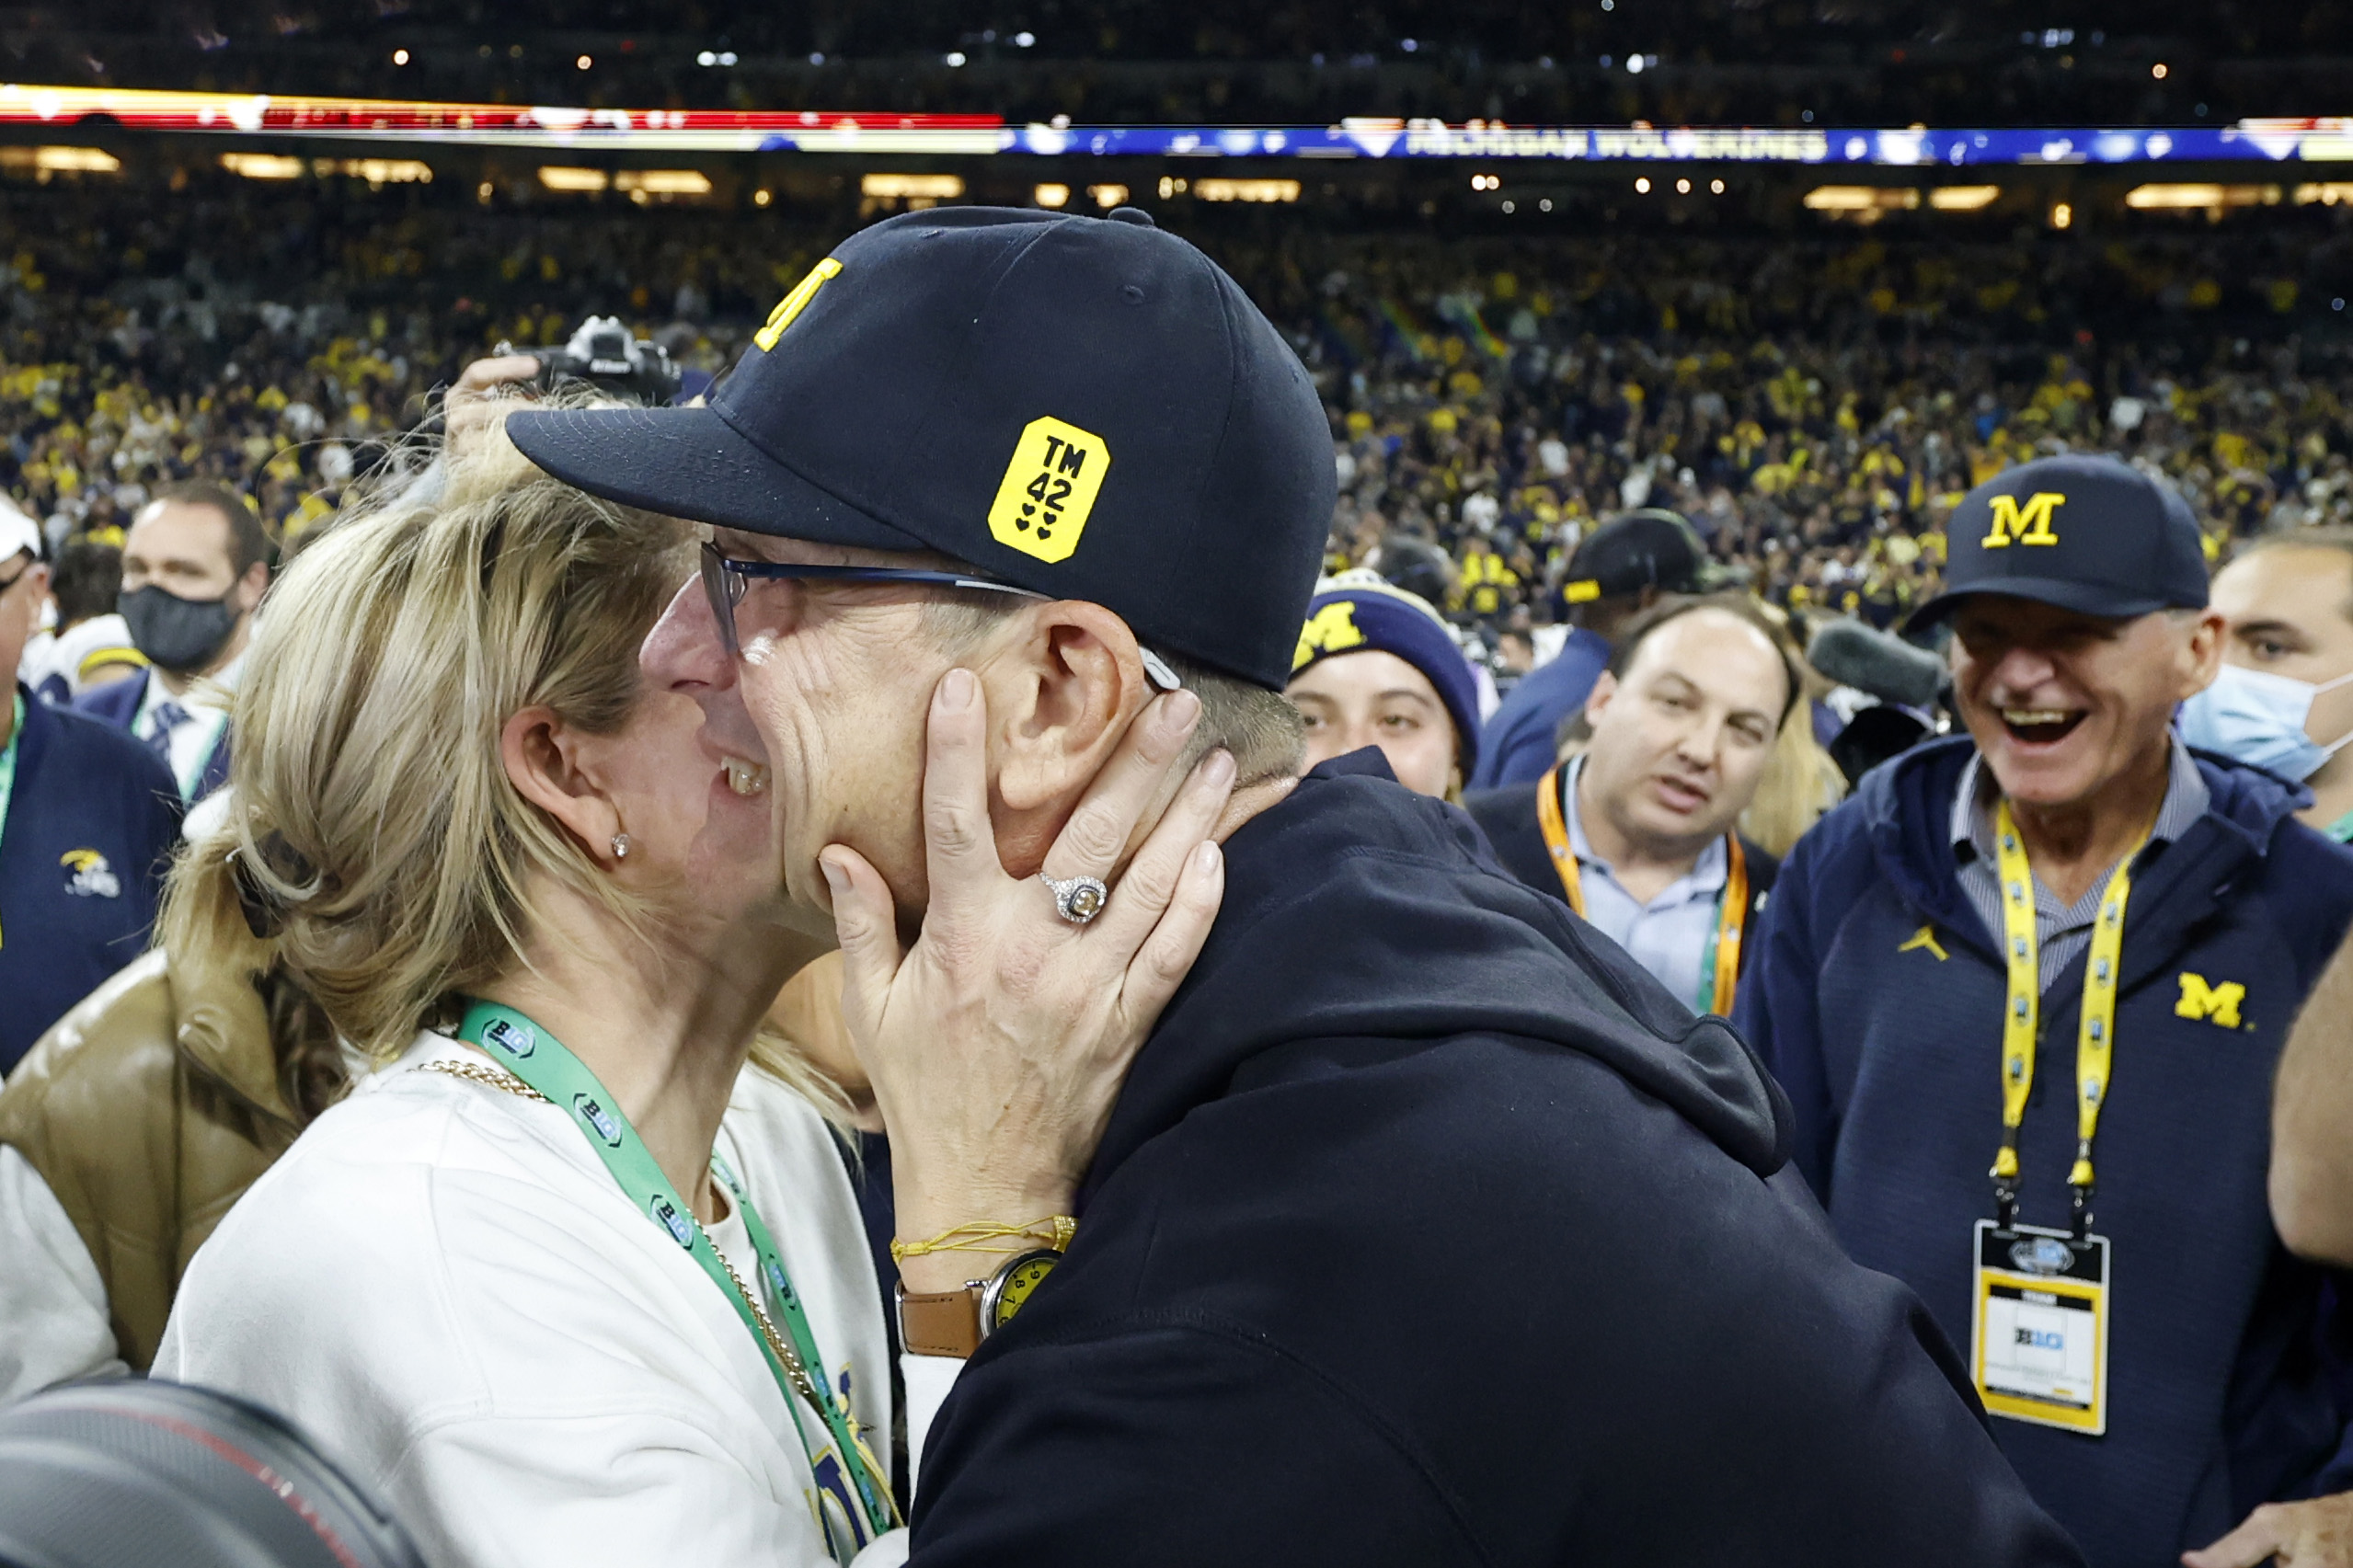 Jim Harbaugh is congratulated by his wife Sarah Harbaugh after defeating the Iowa Hawkeyes in the Big Ten Football Championship Game on December 4, 2021, in Indianapolis, Indiana | Source: Getty Images